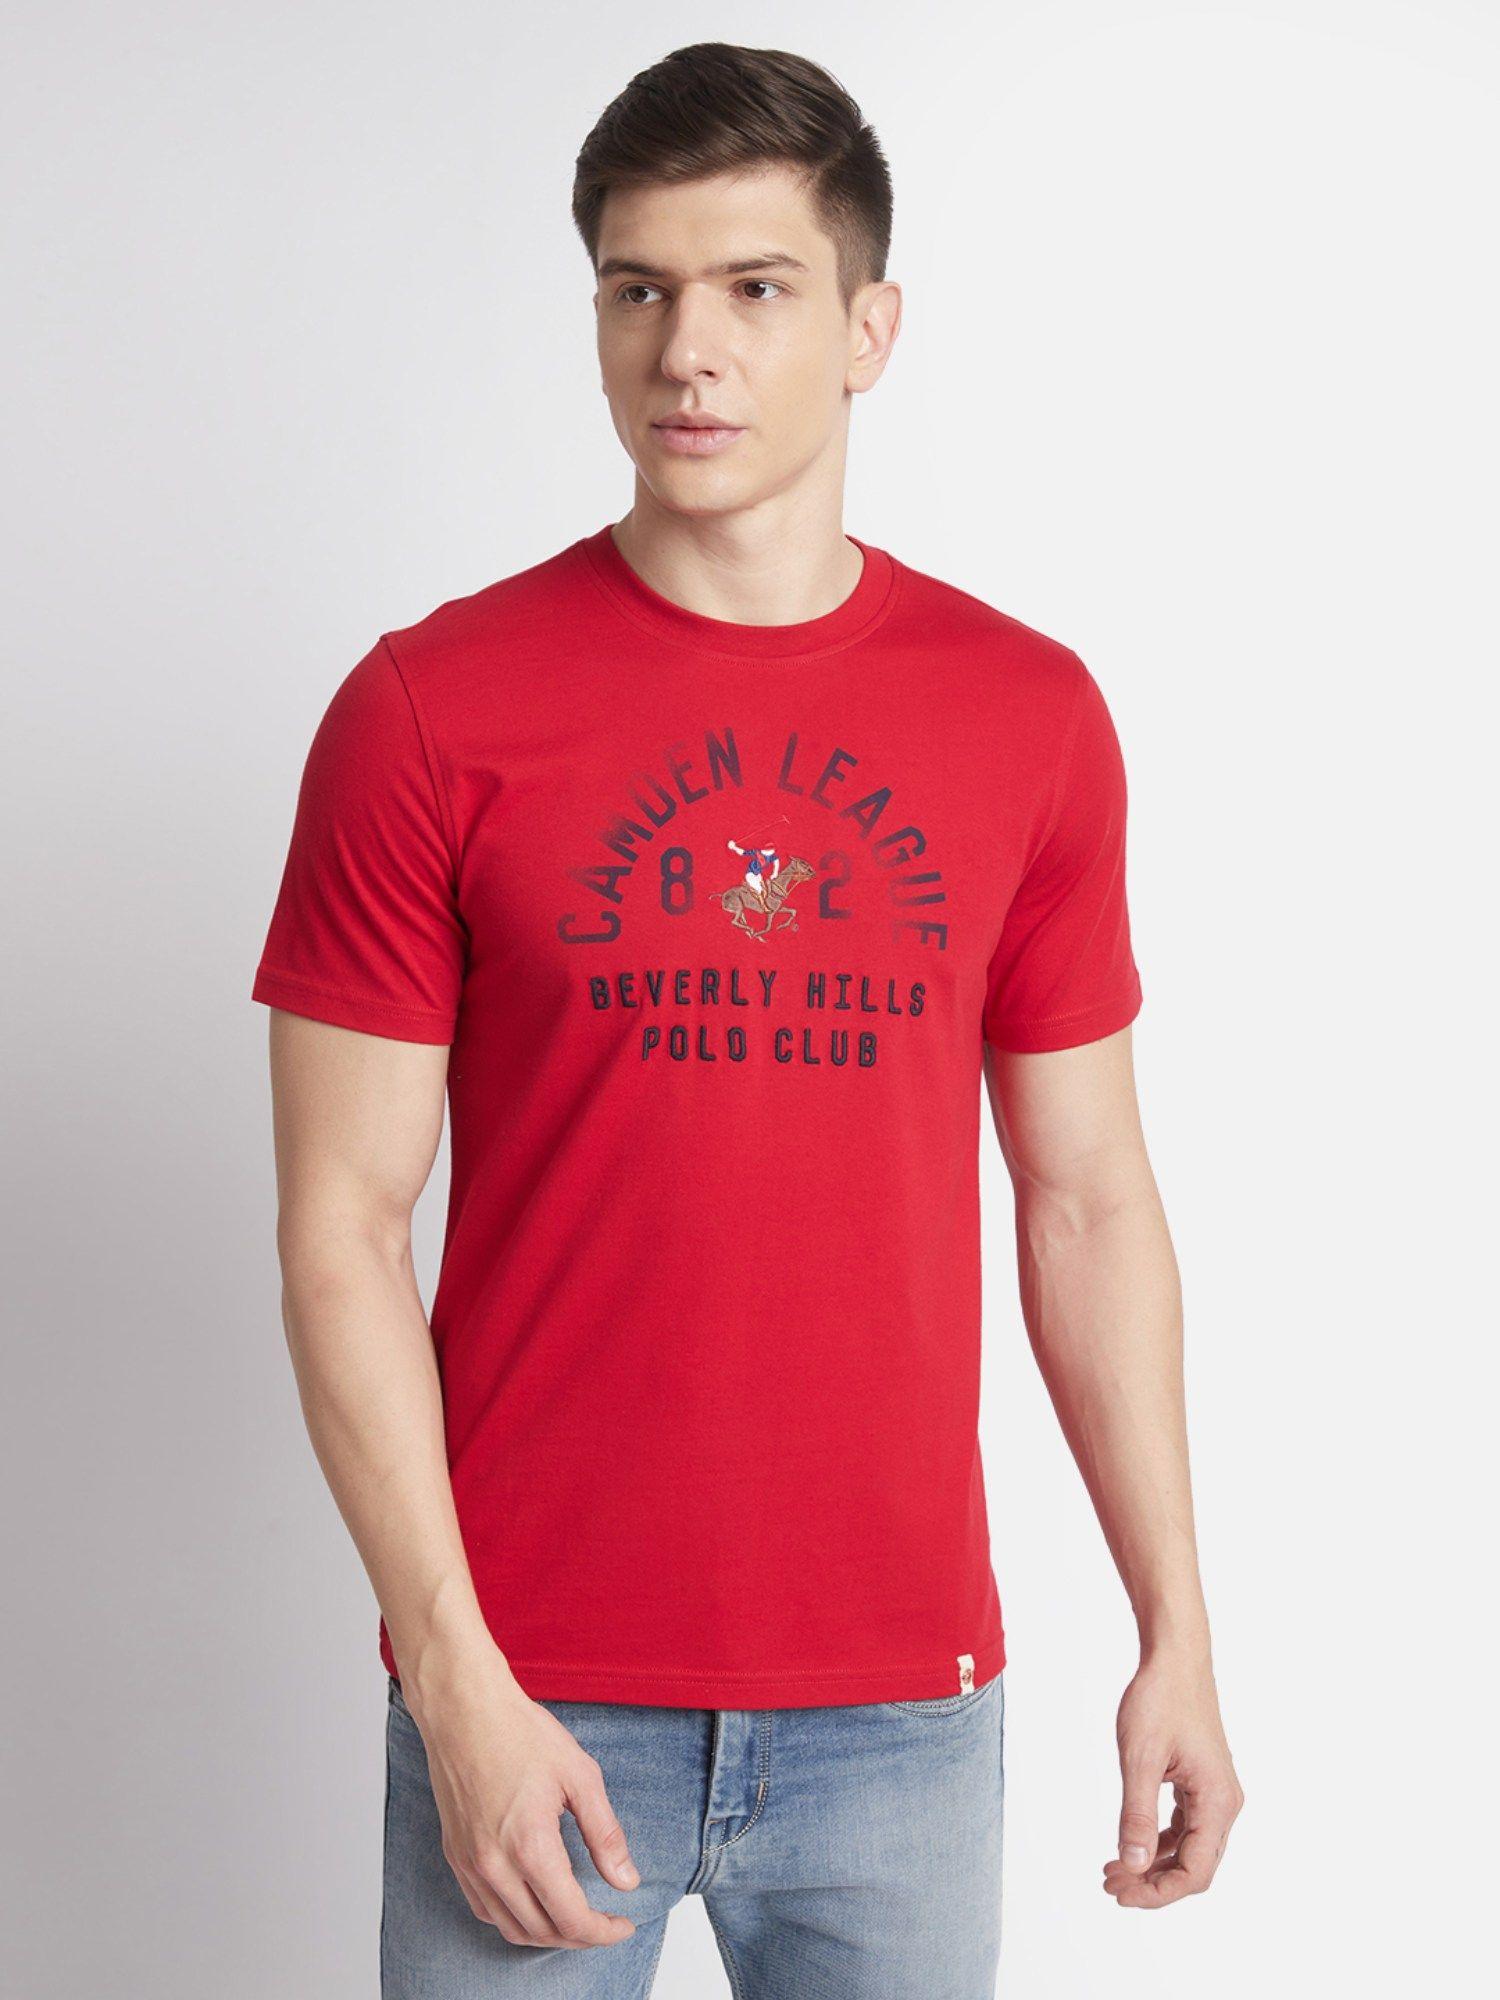 speckled jersey red t-shirt